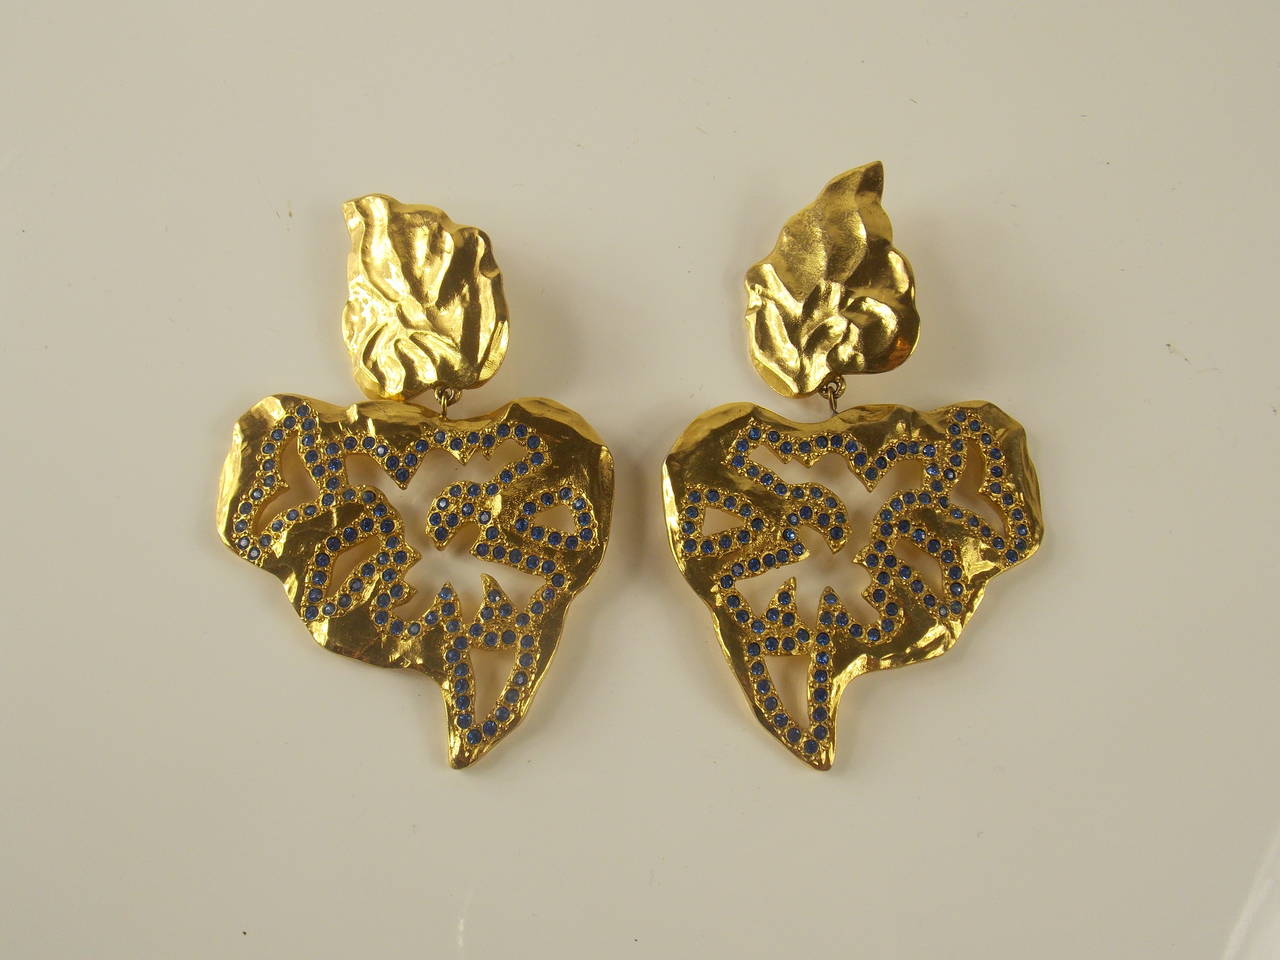 Yves Saint Laurent gold plated drop with blue crystal chips clip on earrings.
Produced for the runway, these hand crafted gorgeous and unique earrings are a collectors dream.